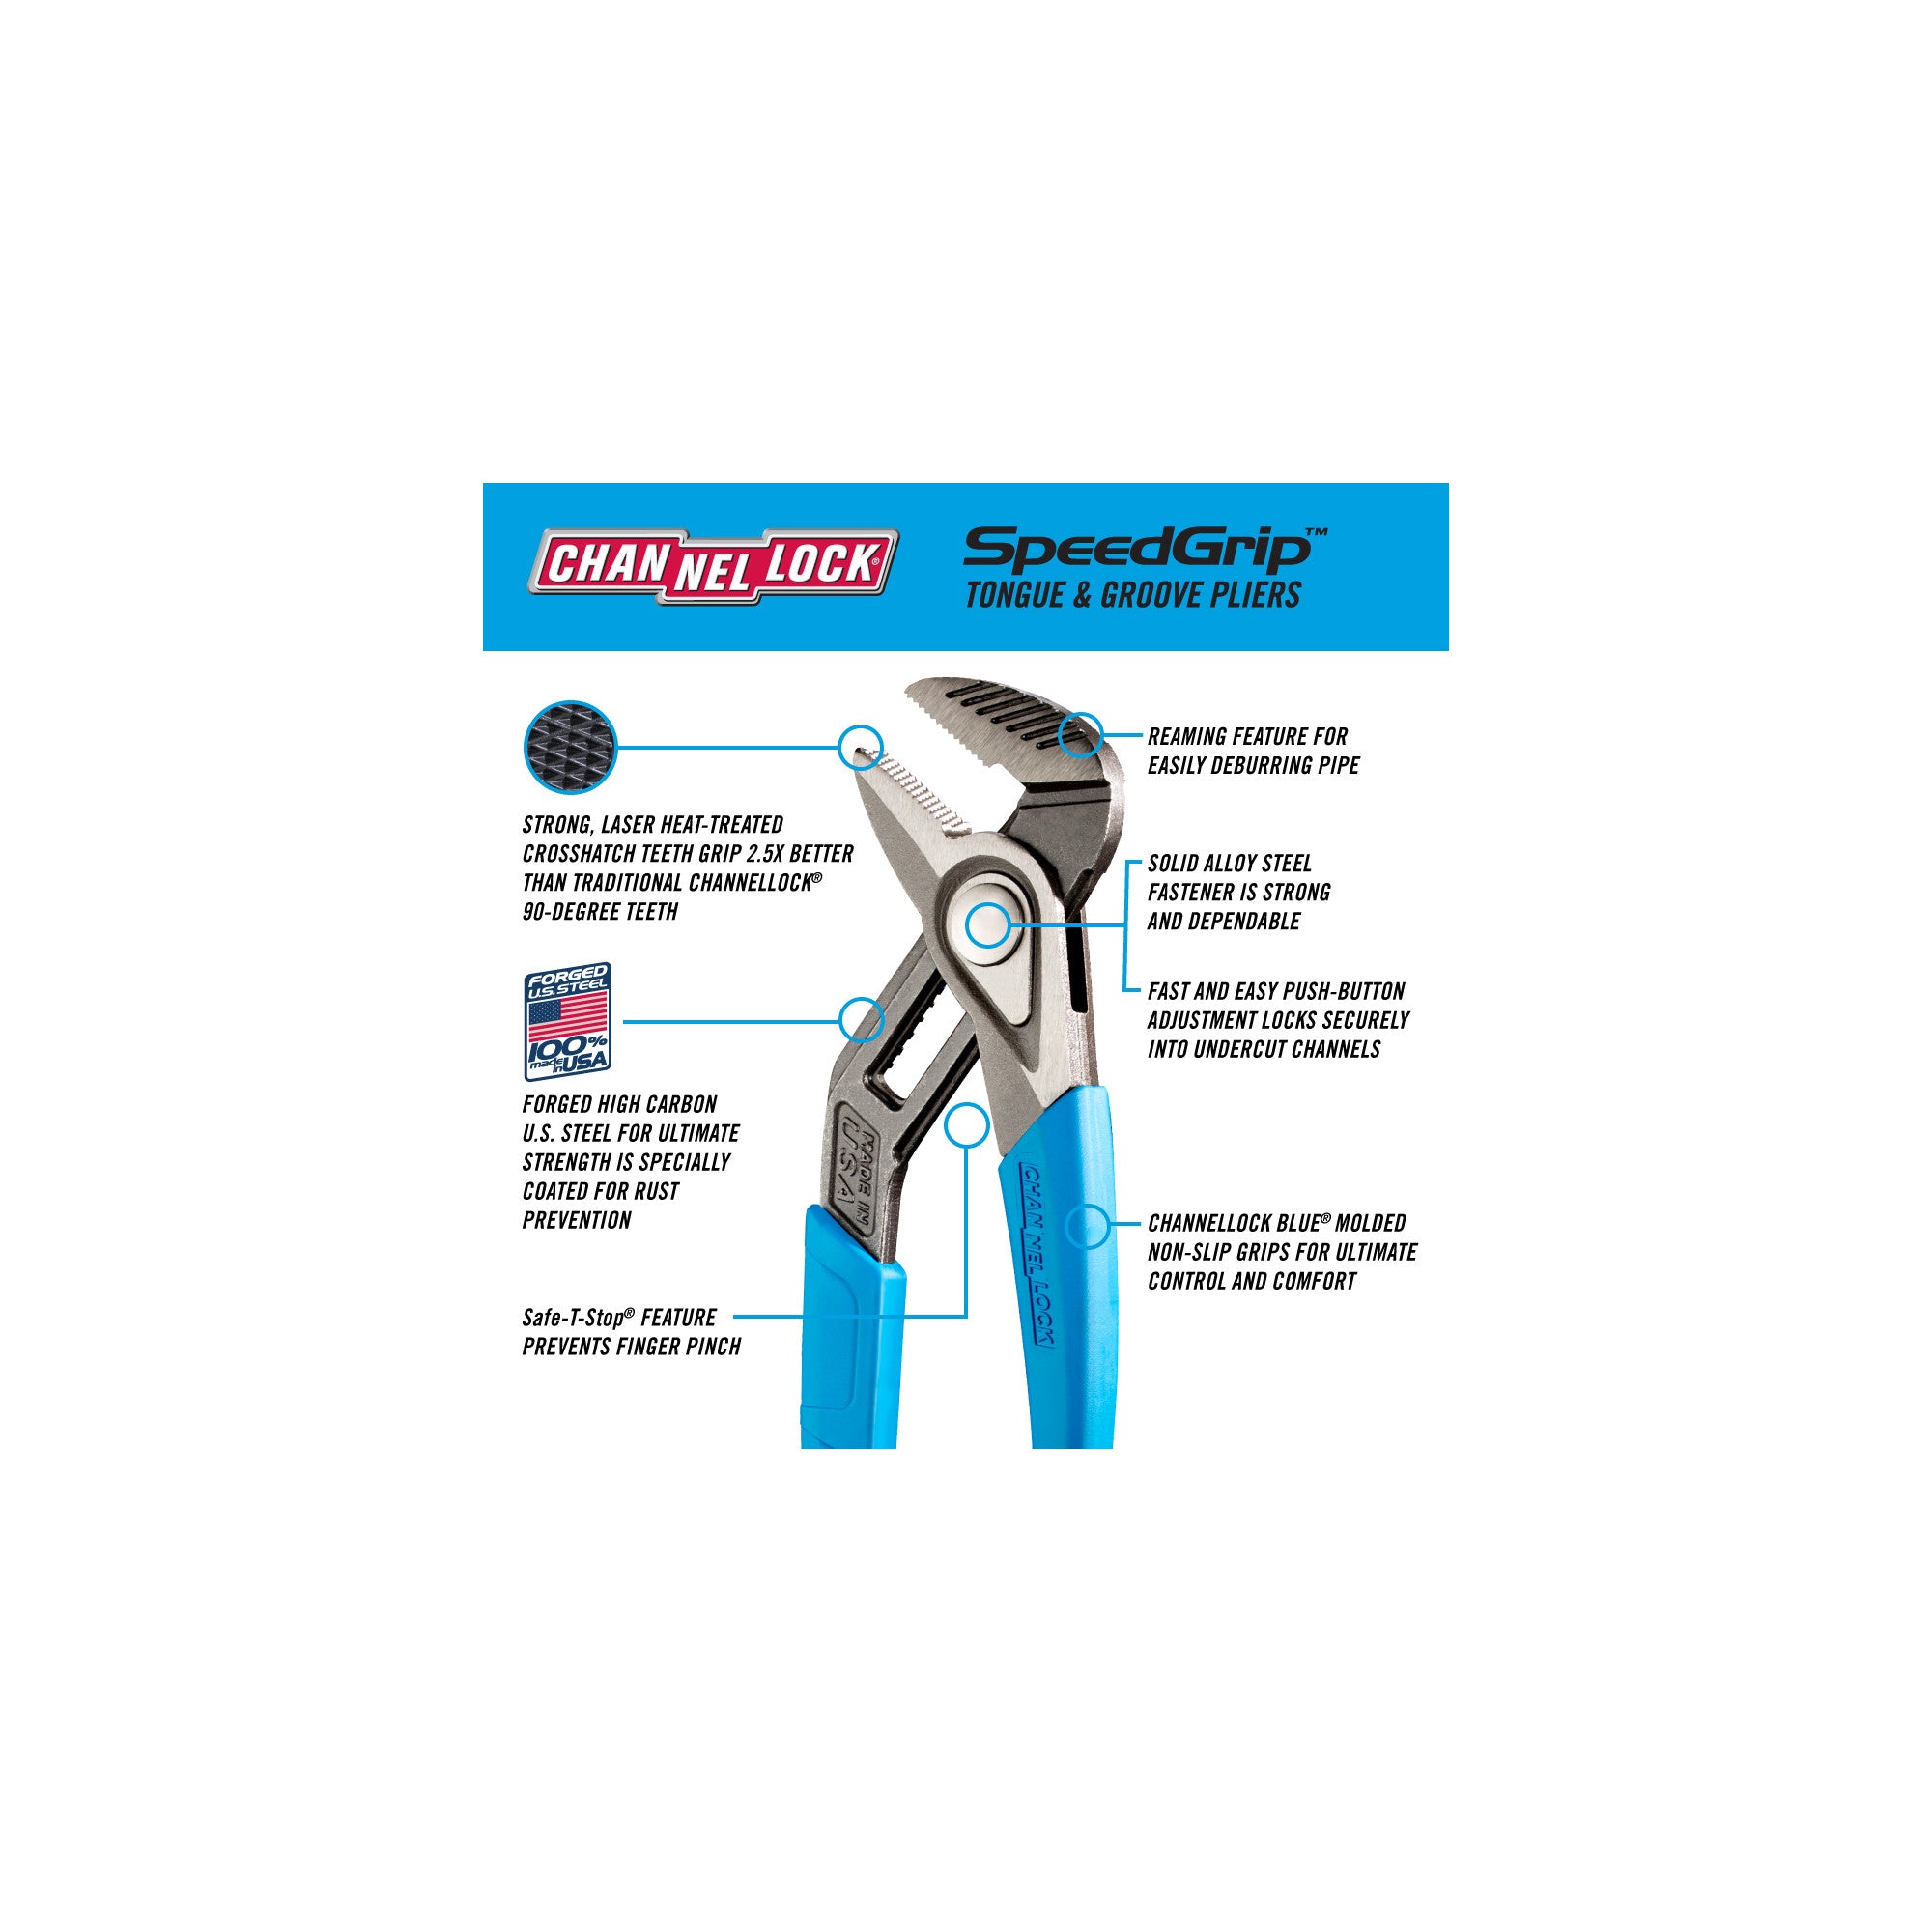 3pc SPEEDGRIP™ Tongue & Groove Pliers Set (GS-3XECP) – CHANNELLOCK®